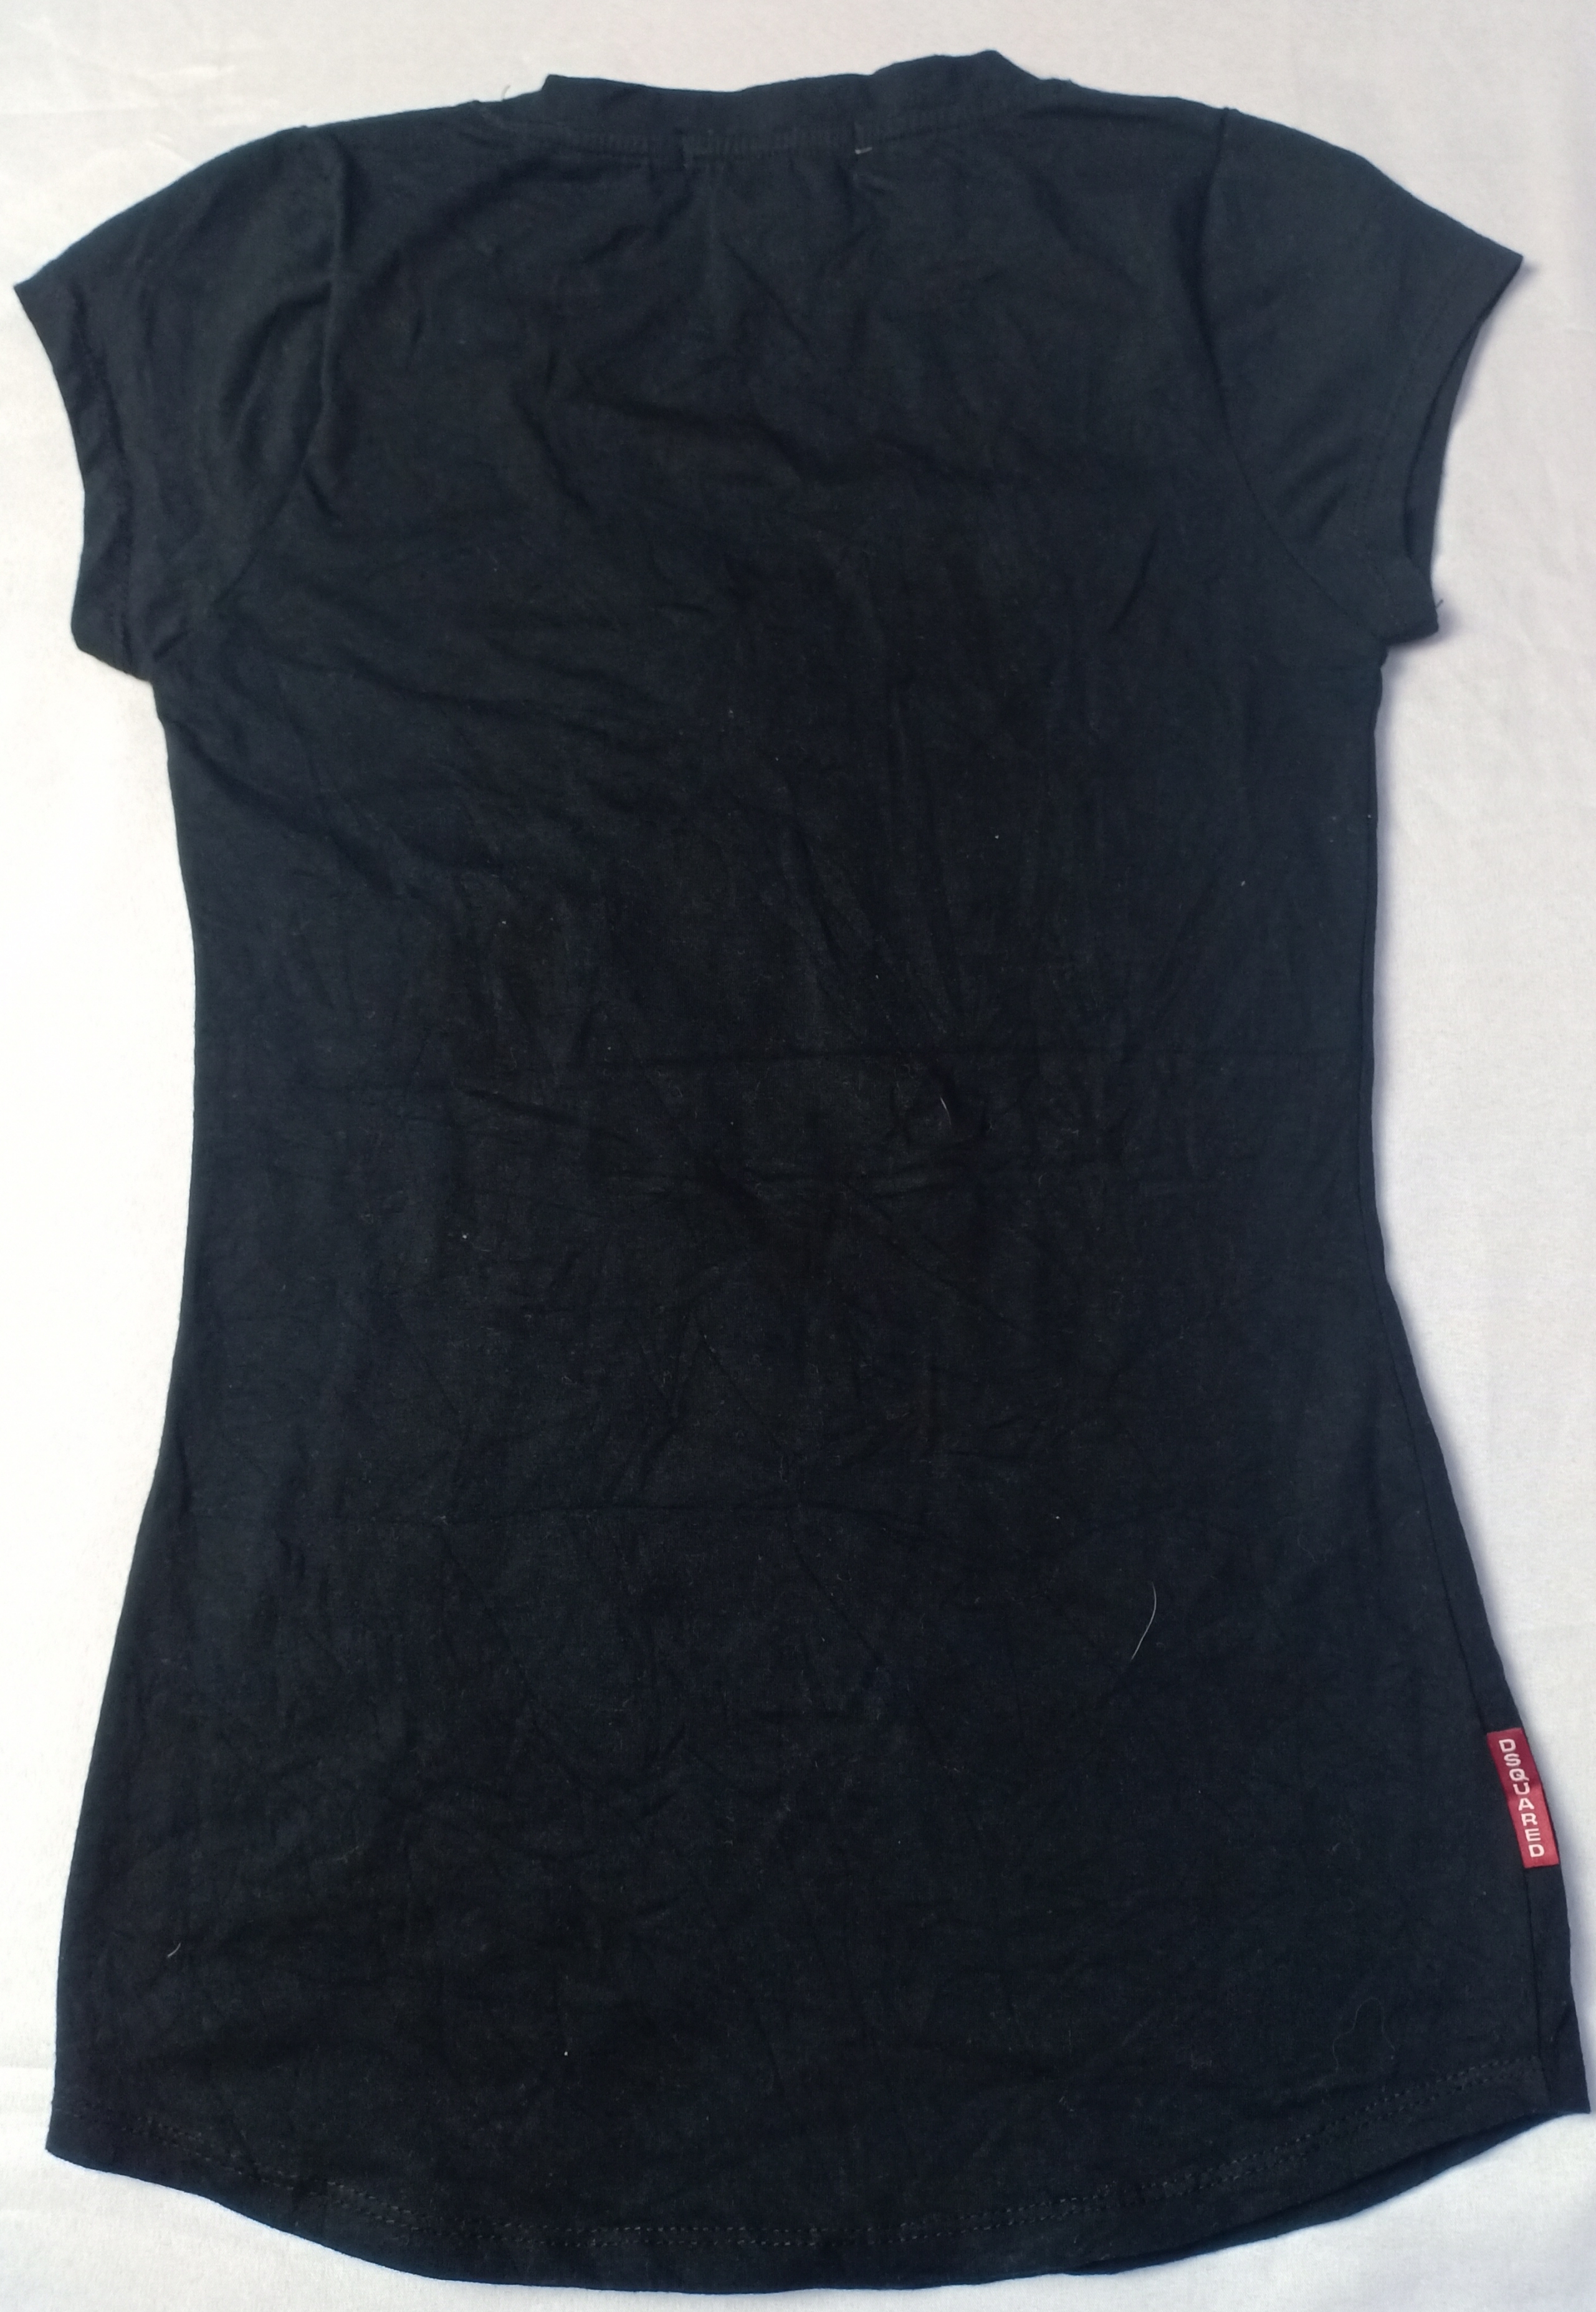 Dsquared2 Sleeveless Tee Stretchable Cap Italy Made size F - 8